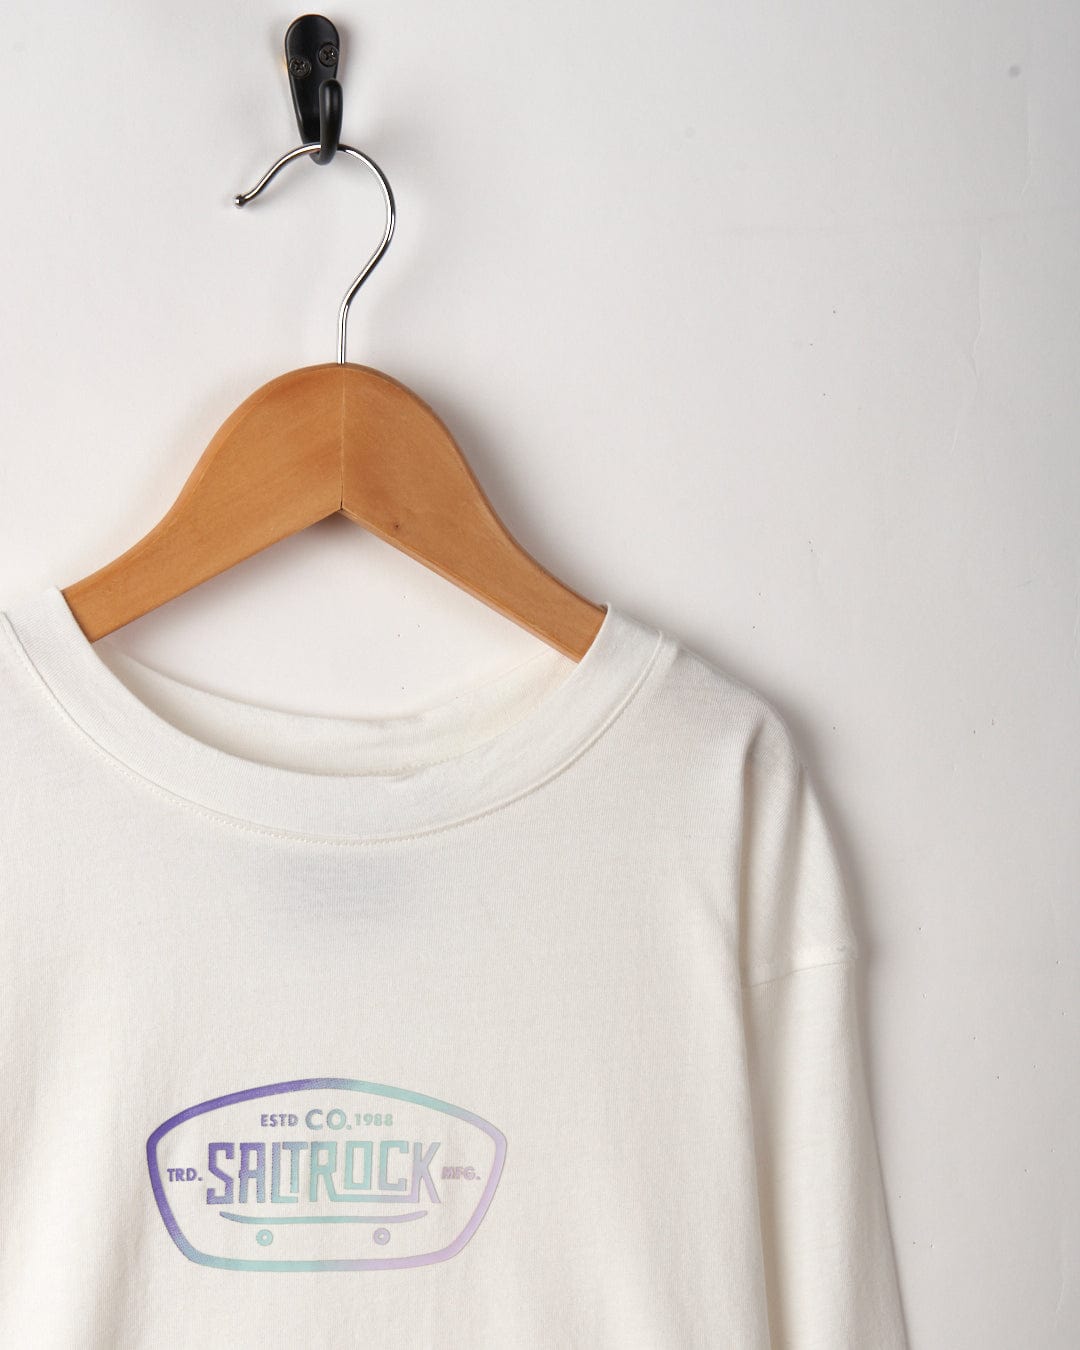 White Rezz Sleeve - Kids Recycled Long Sleeved T-Shirt by Saltrock with a blue logo on a wooden hanger against a plain background.